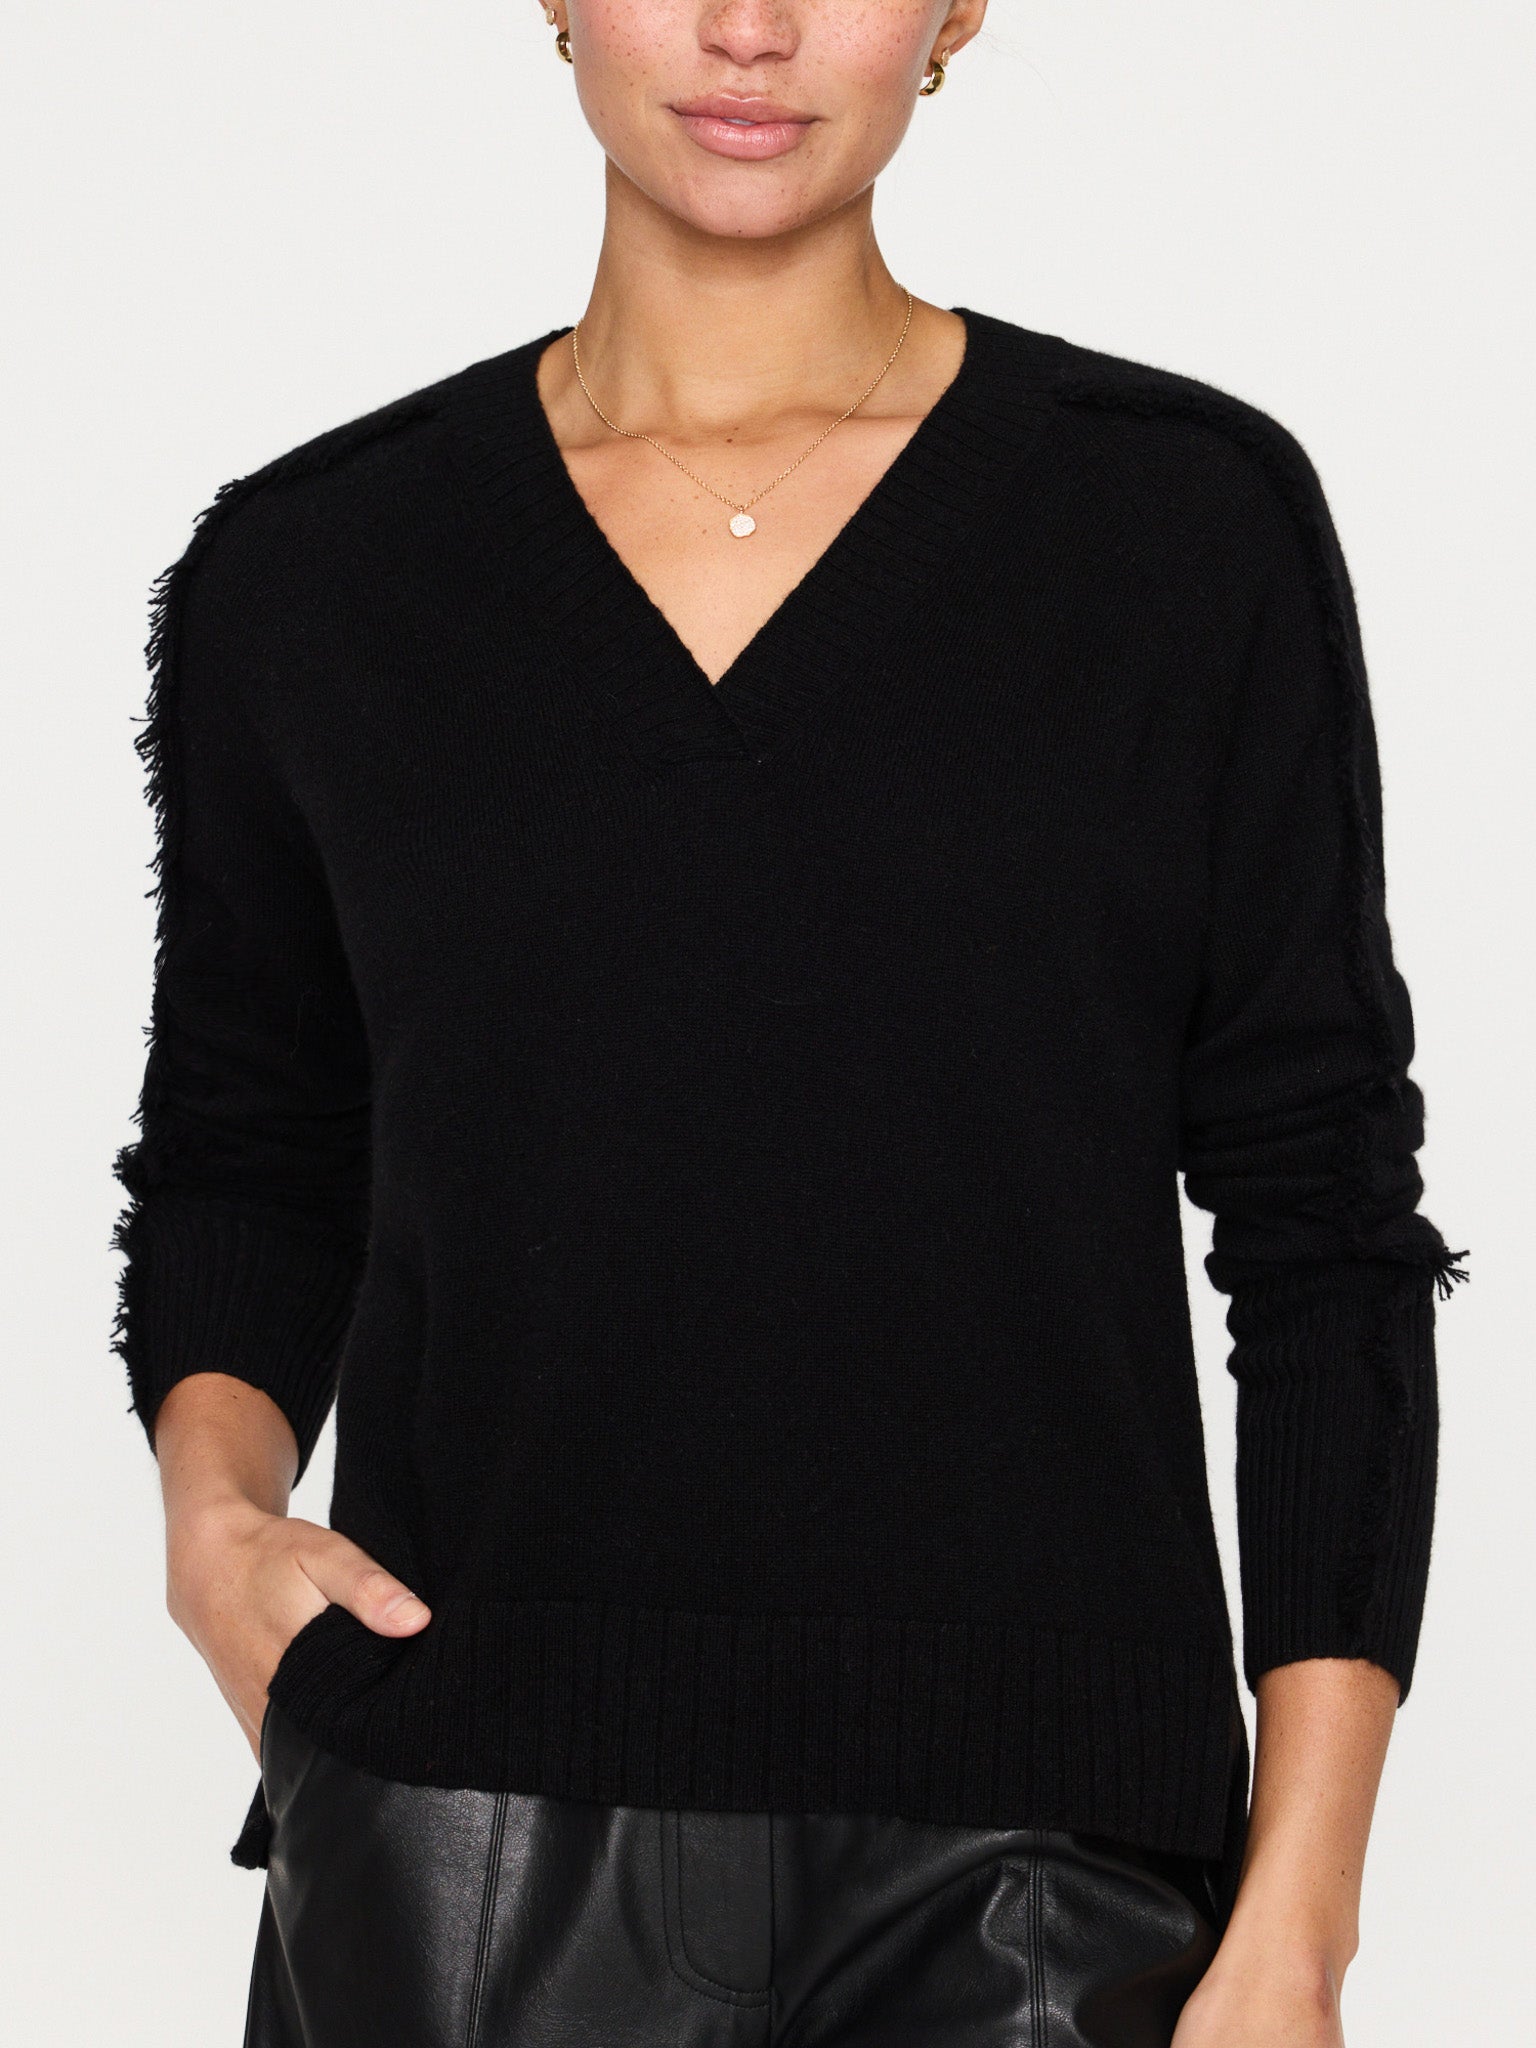 Jolie black layered v-neck sweater front view 2